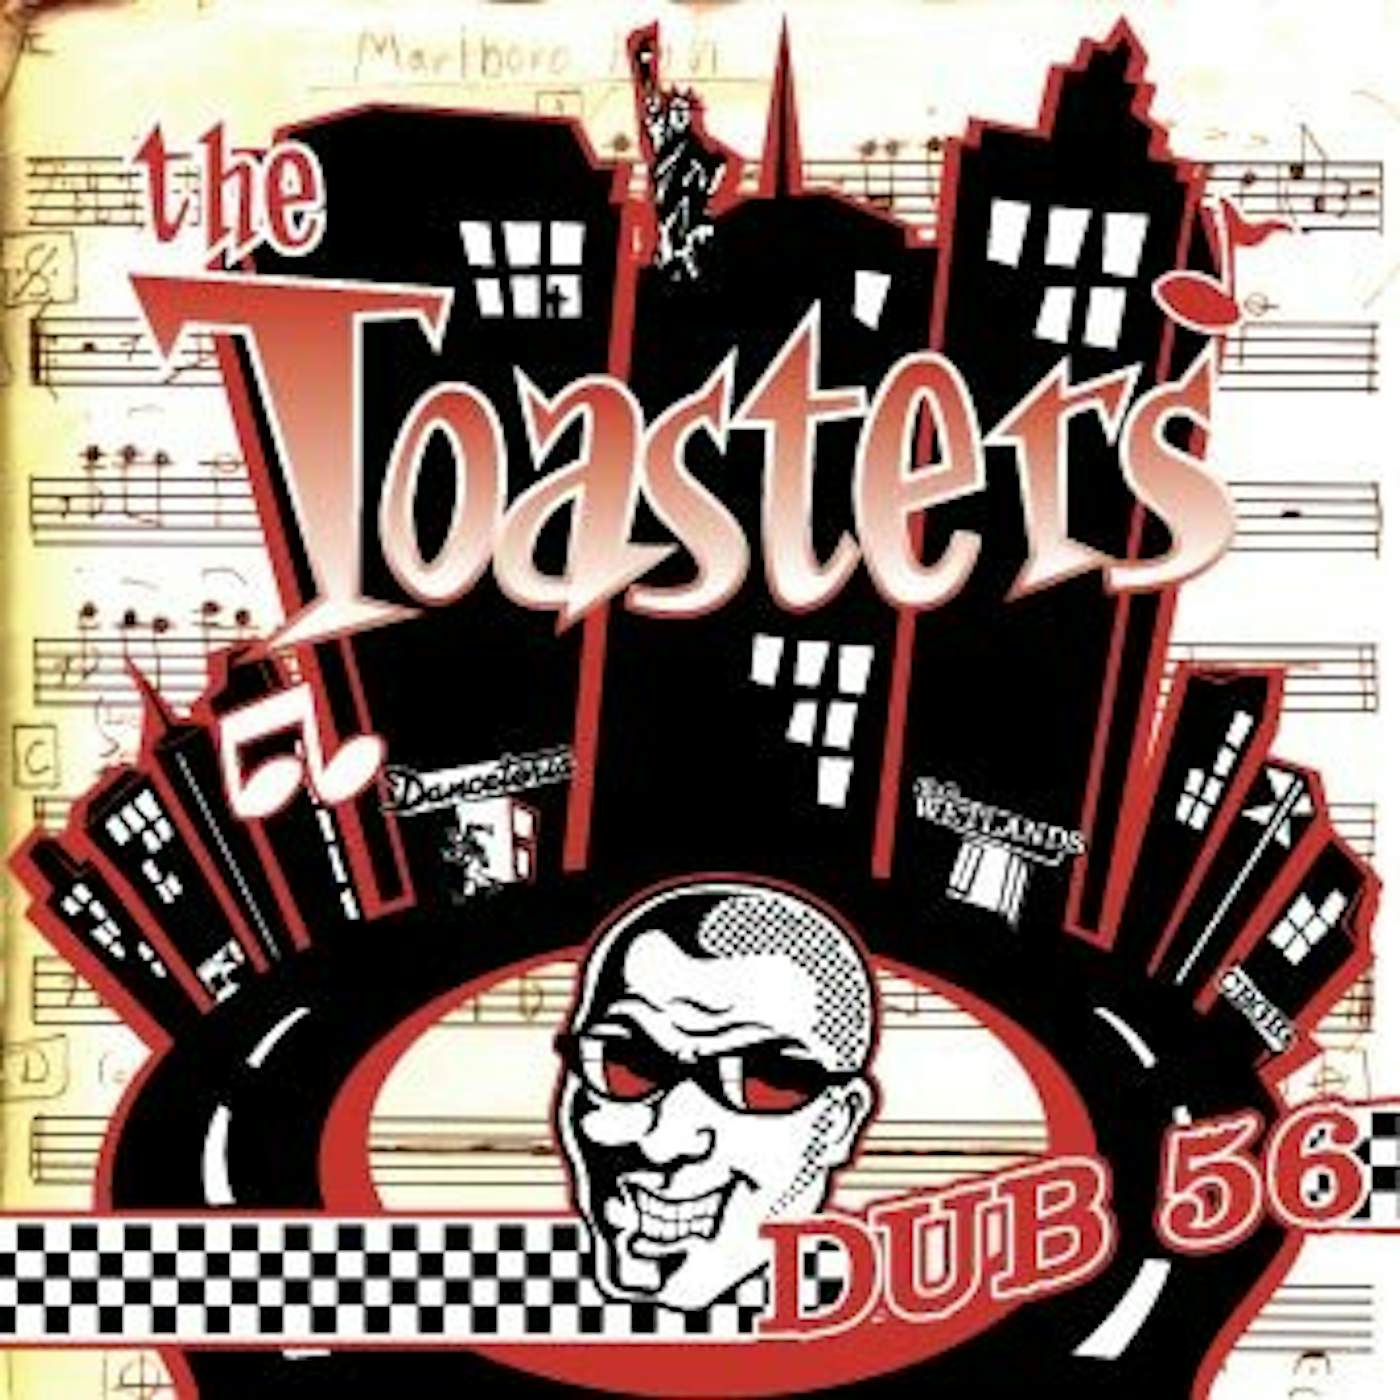 The Toasters DUB 56 CD